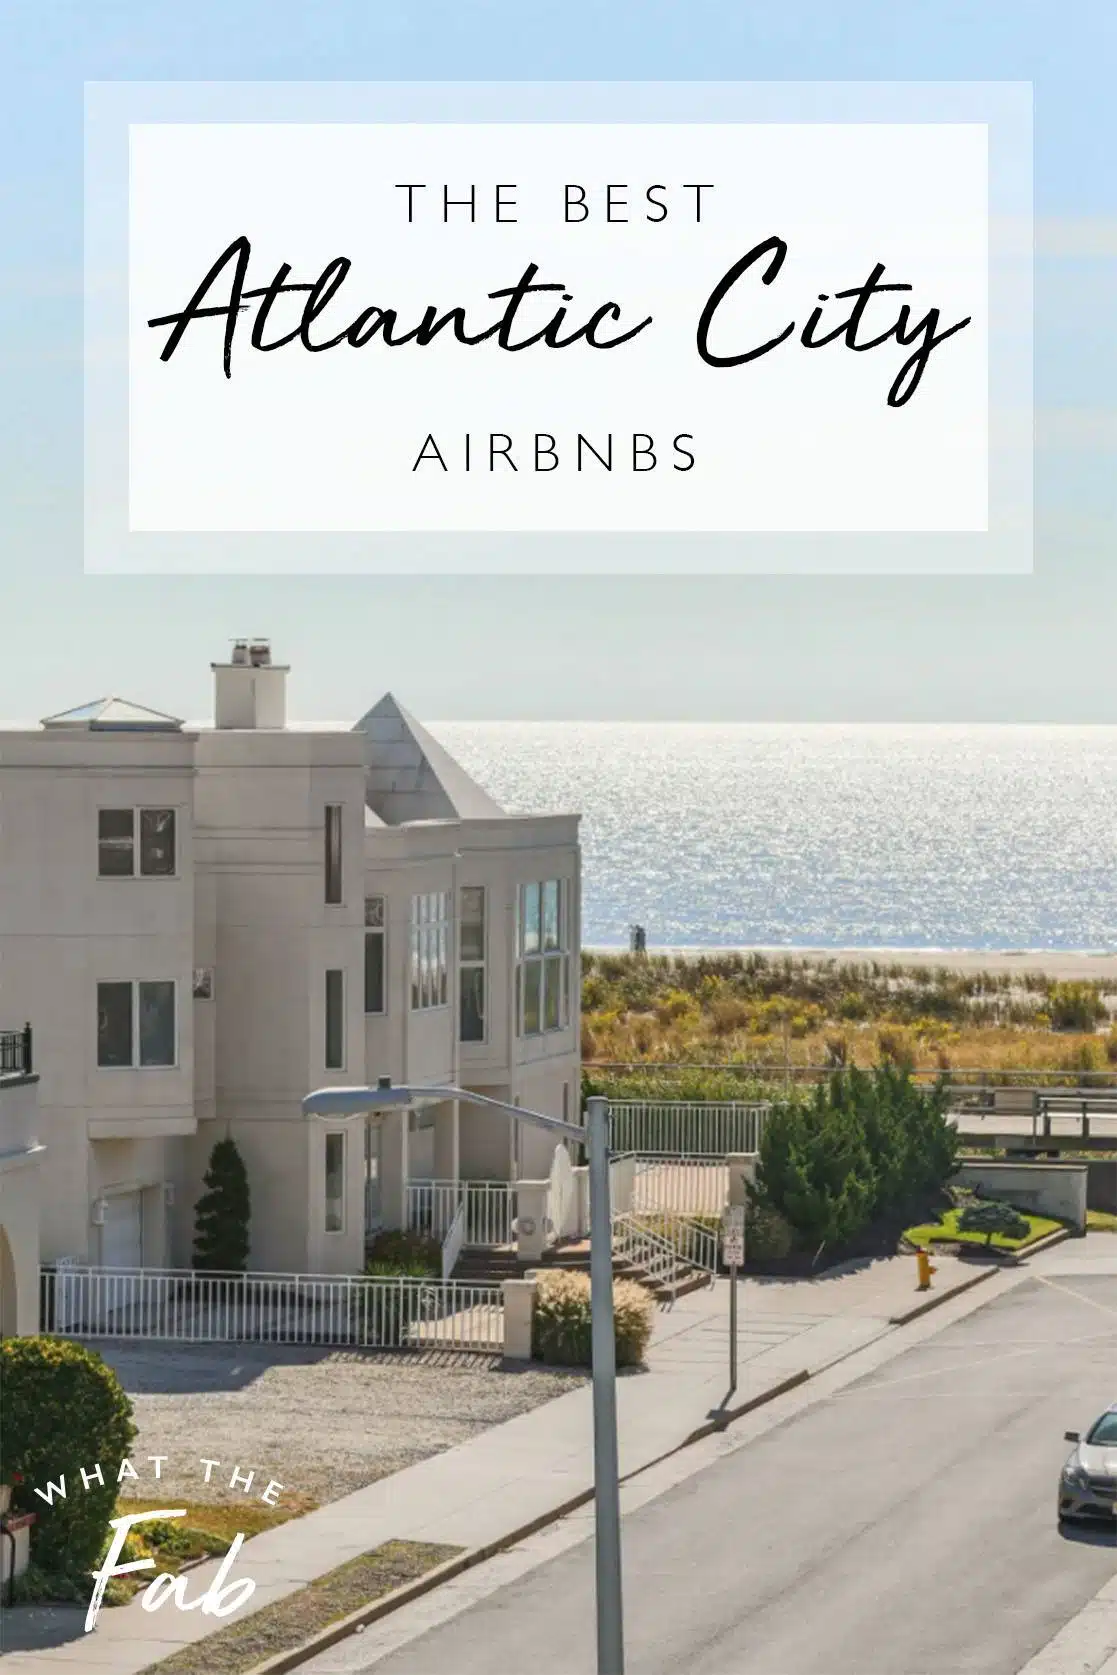 Atlantic City Airbnbs, by Travel Blogger What The Fab